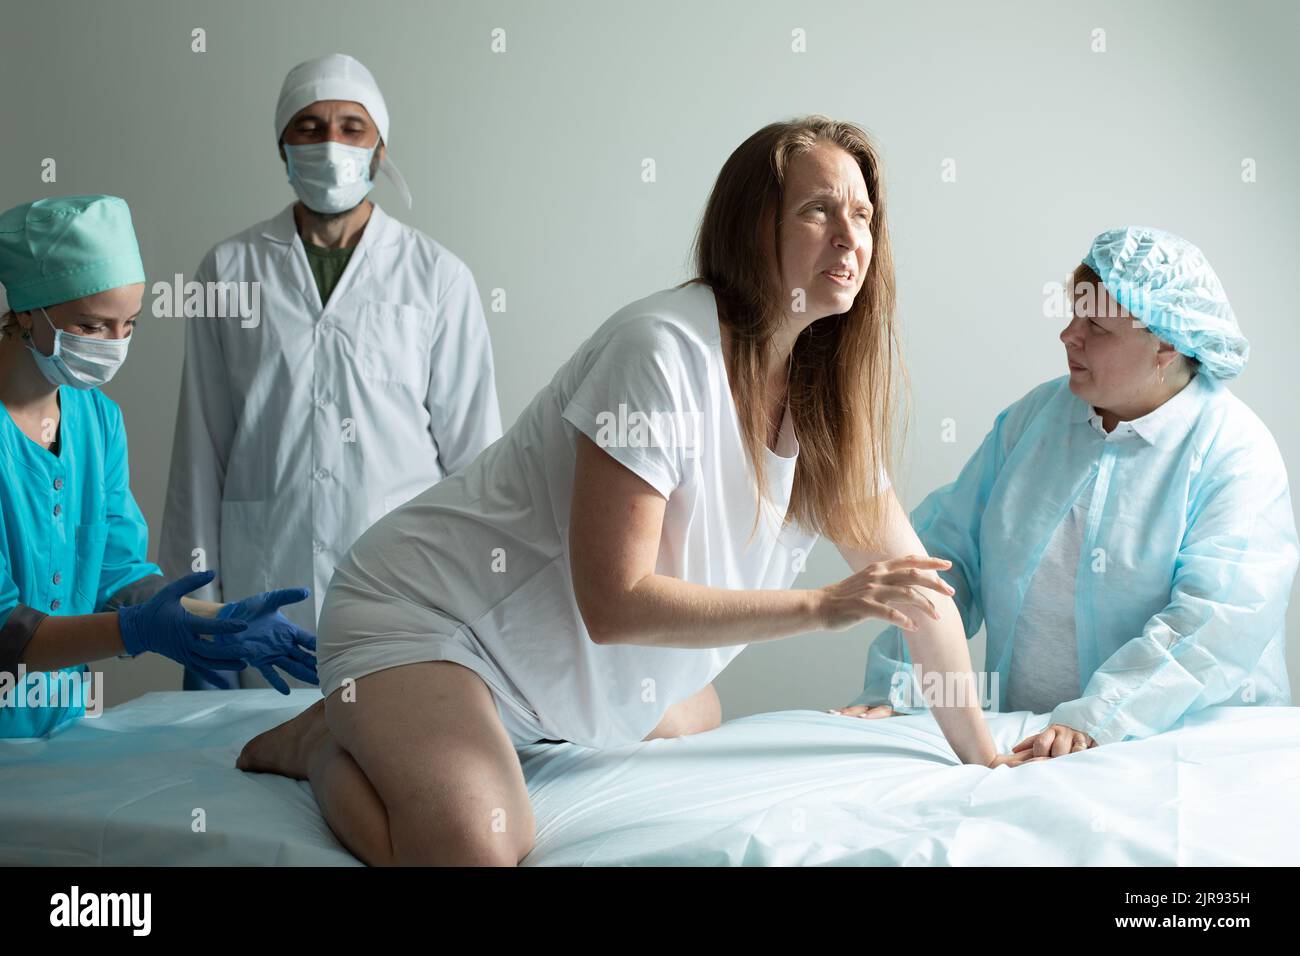 Child birth process, helping personal during natural labour Stock Photo